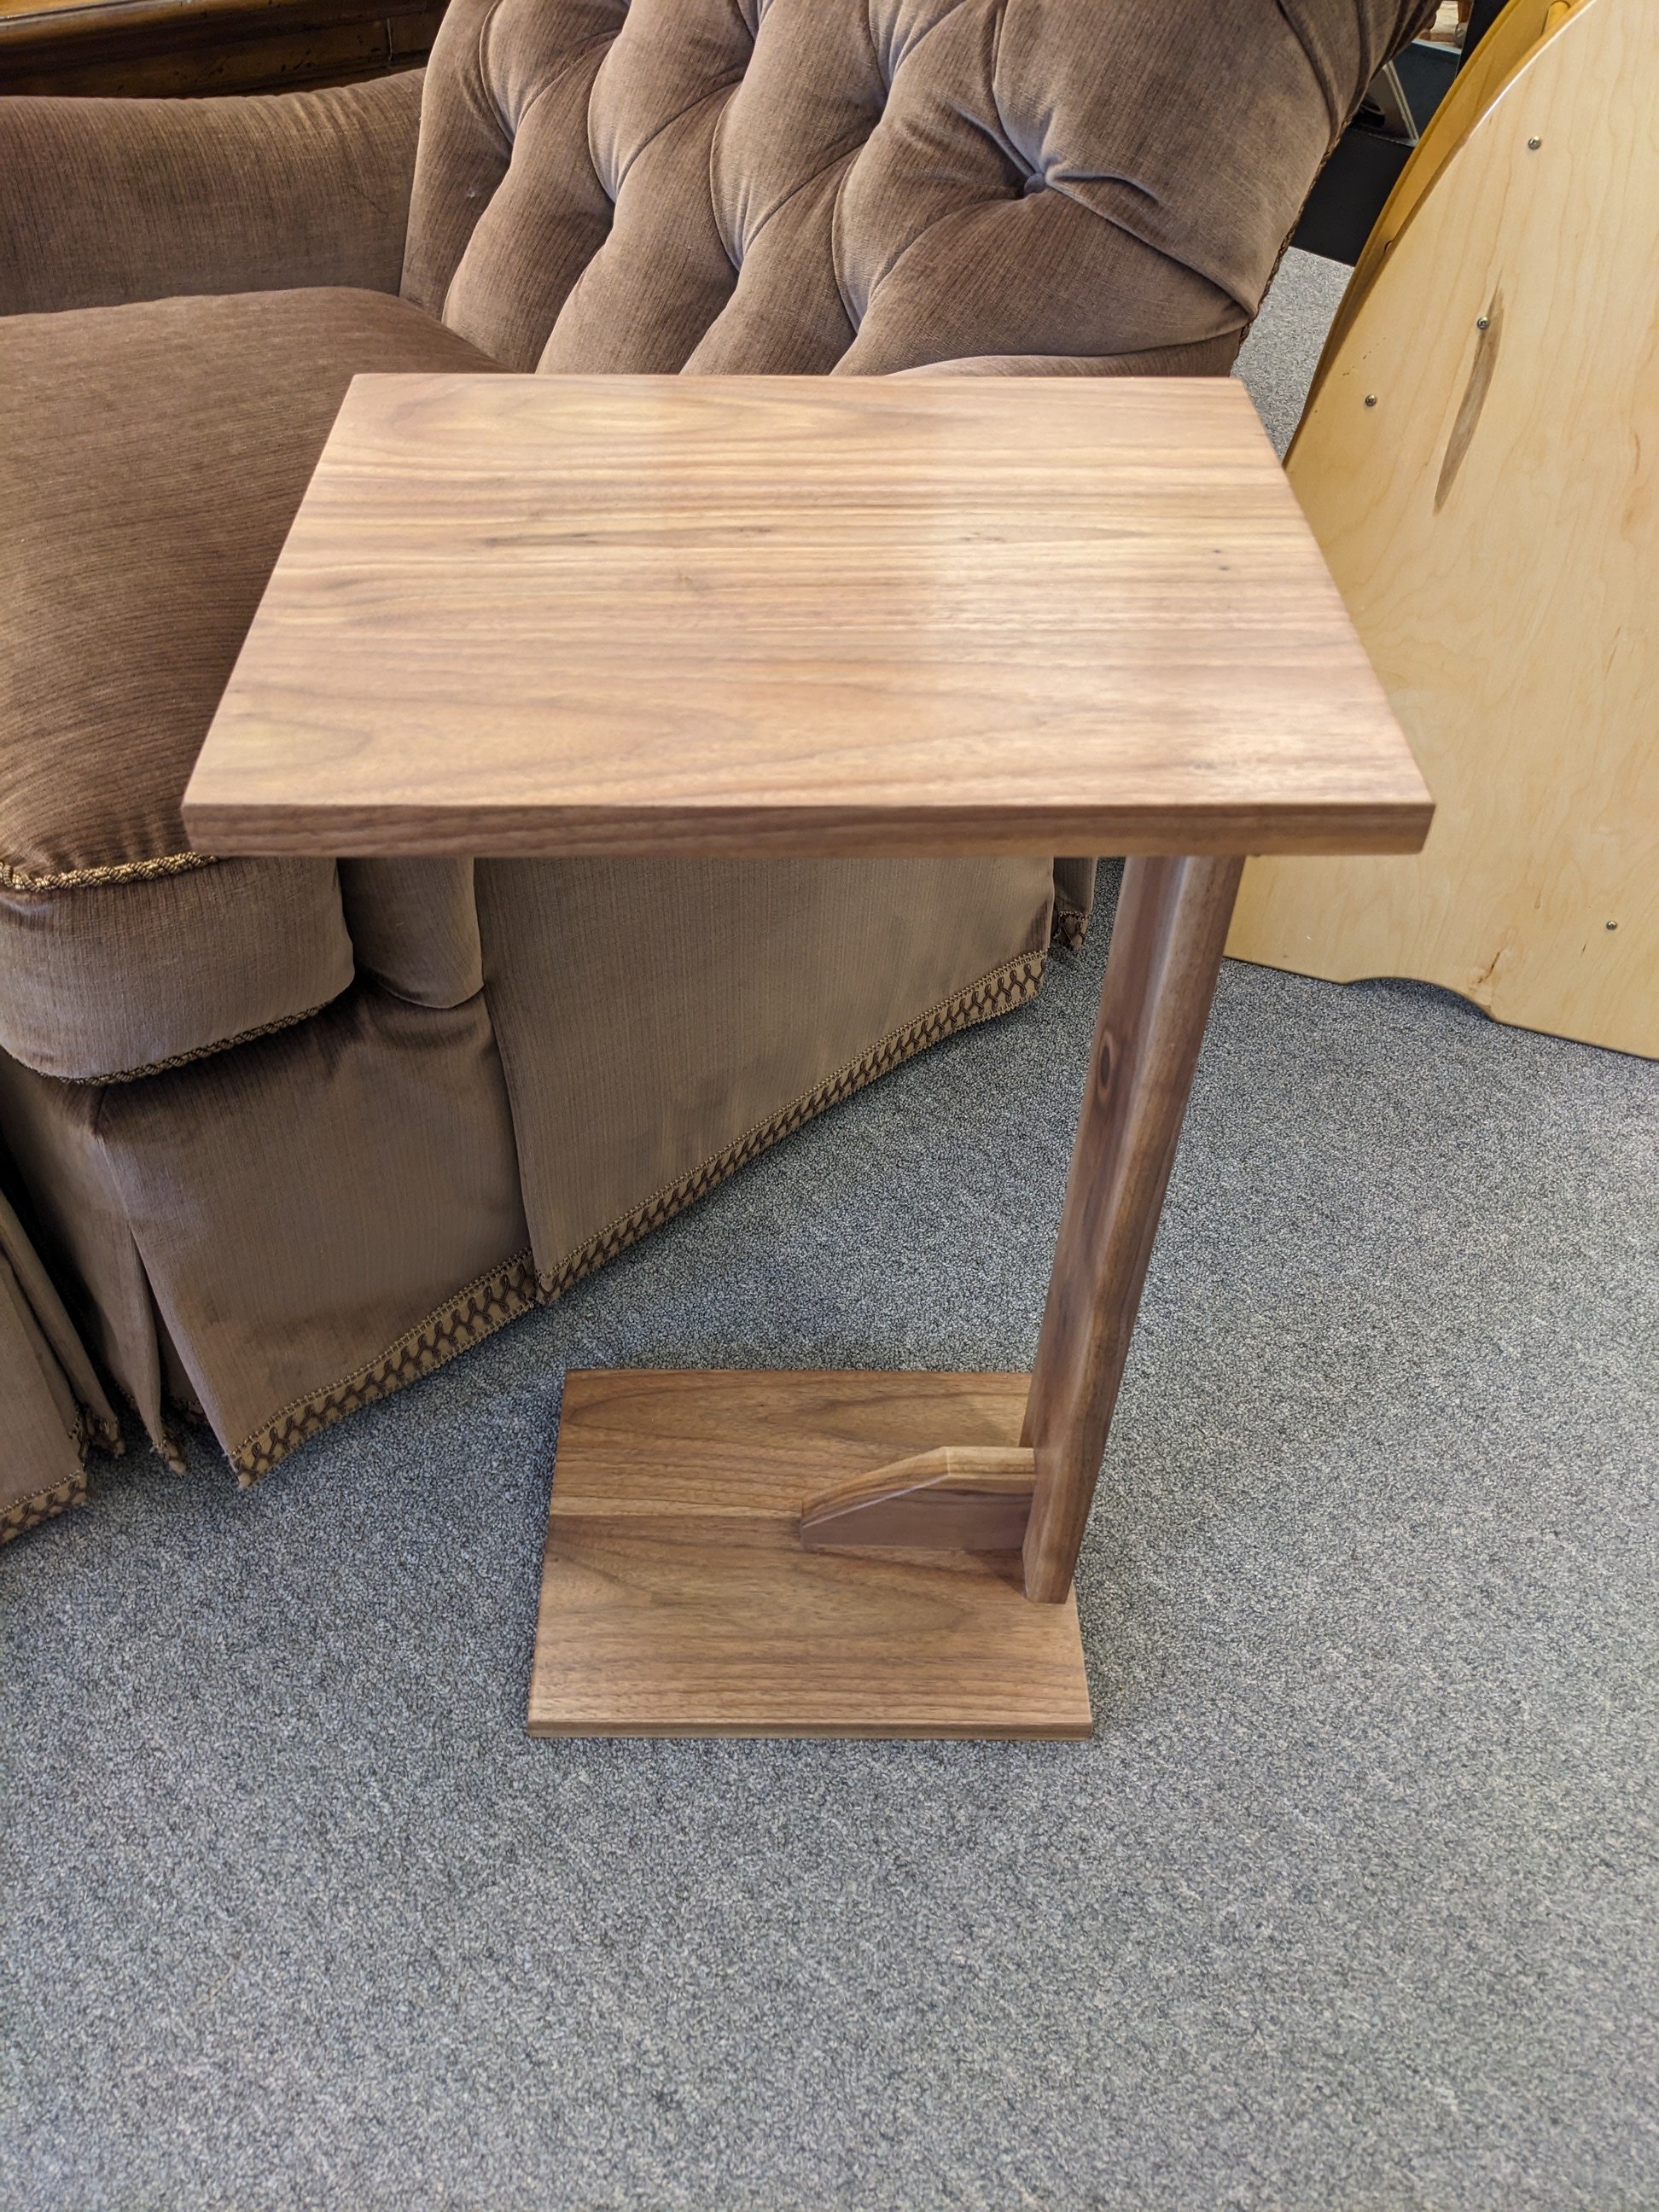 Handcrafted Black Walnut C Table